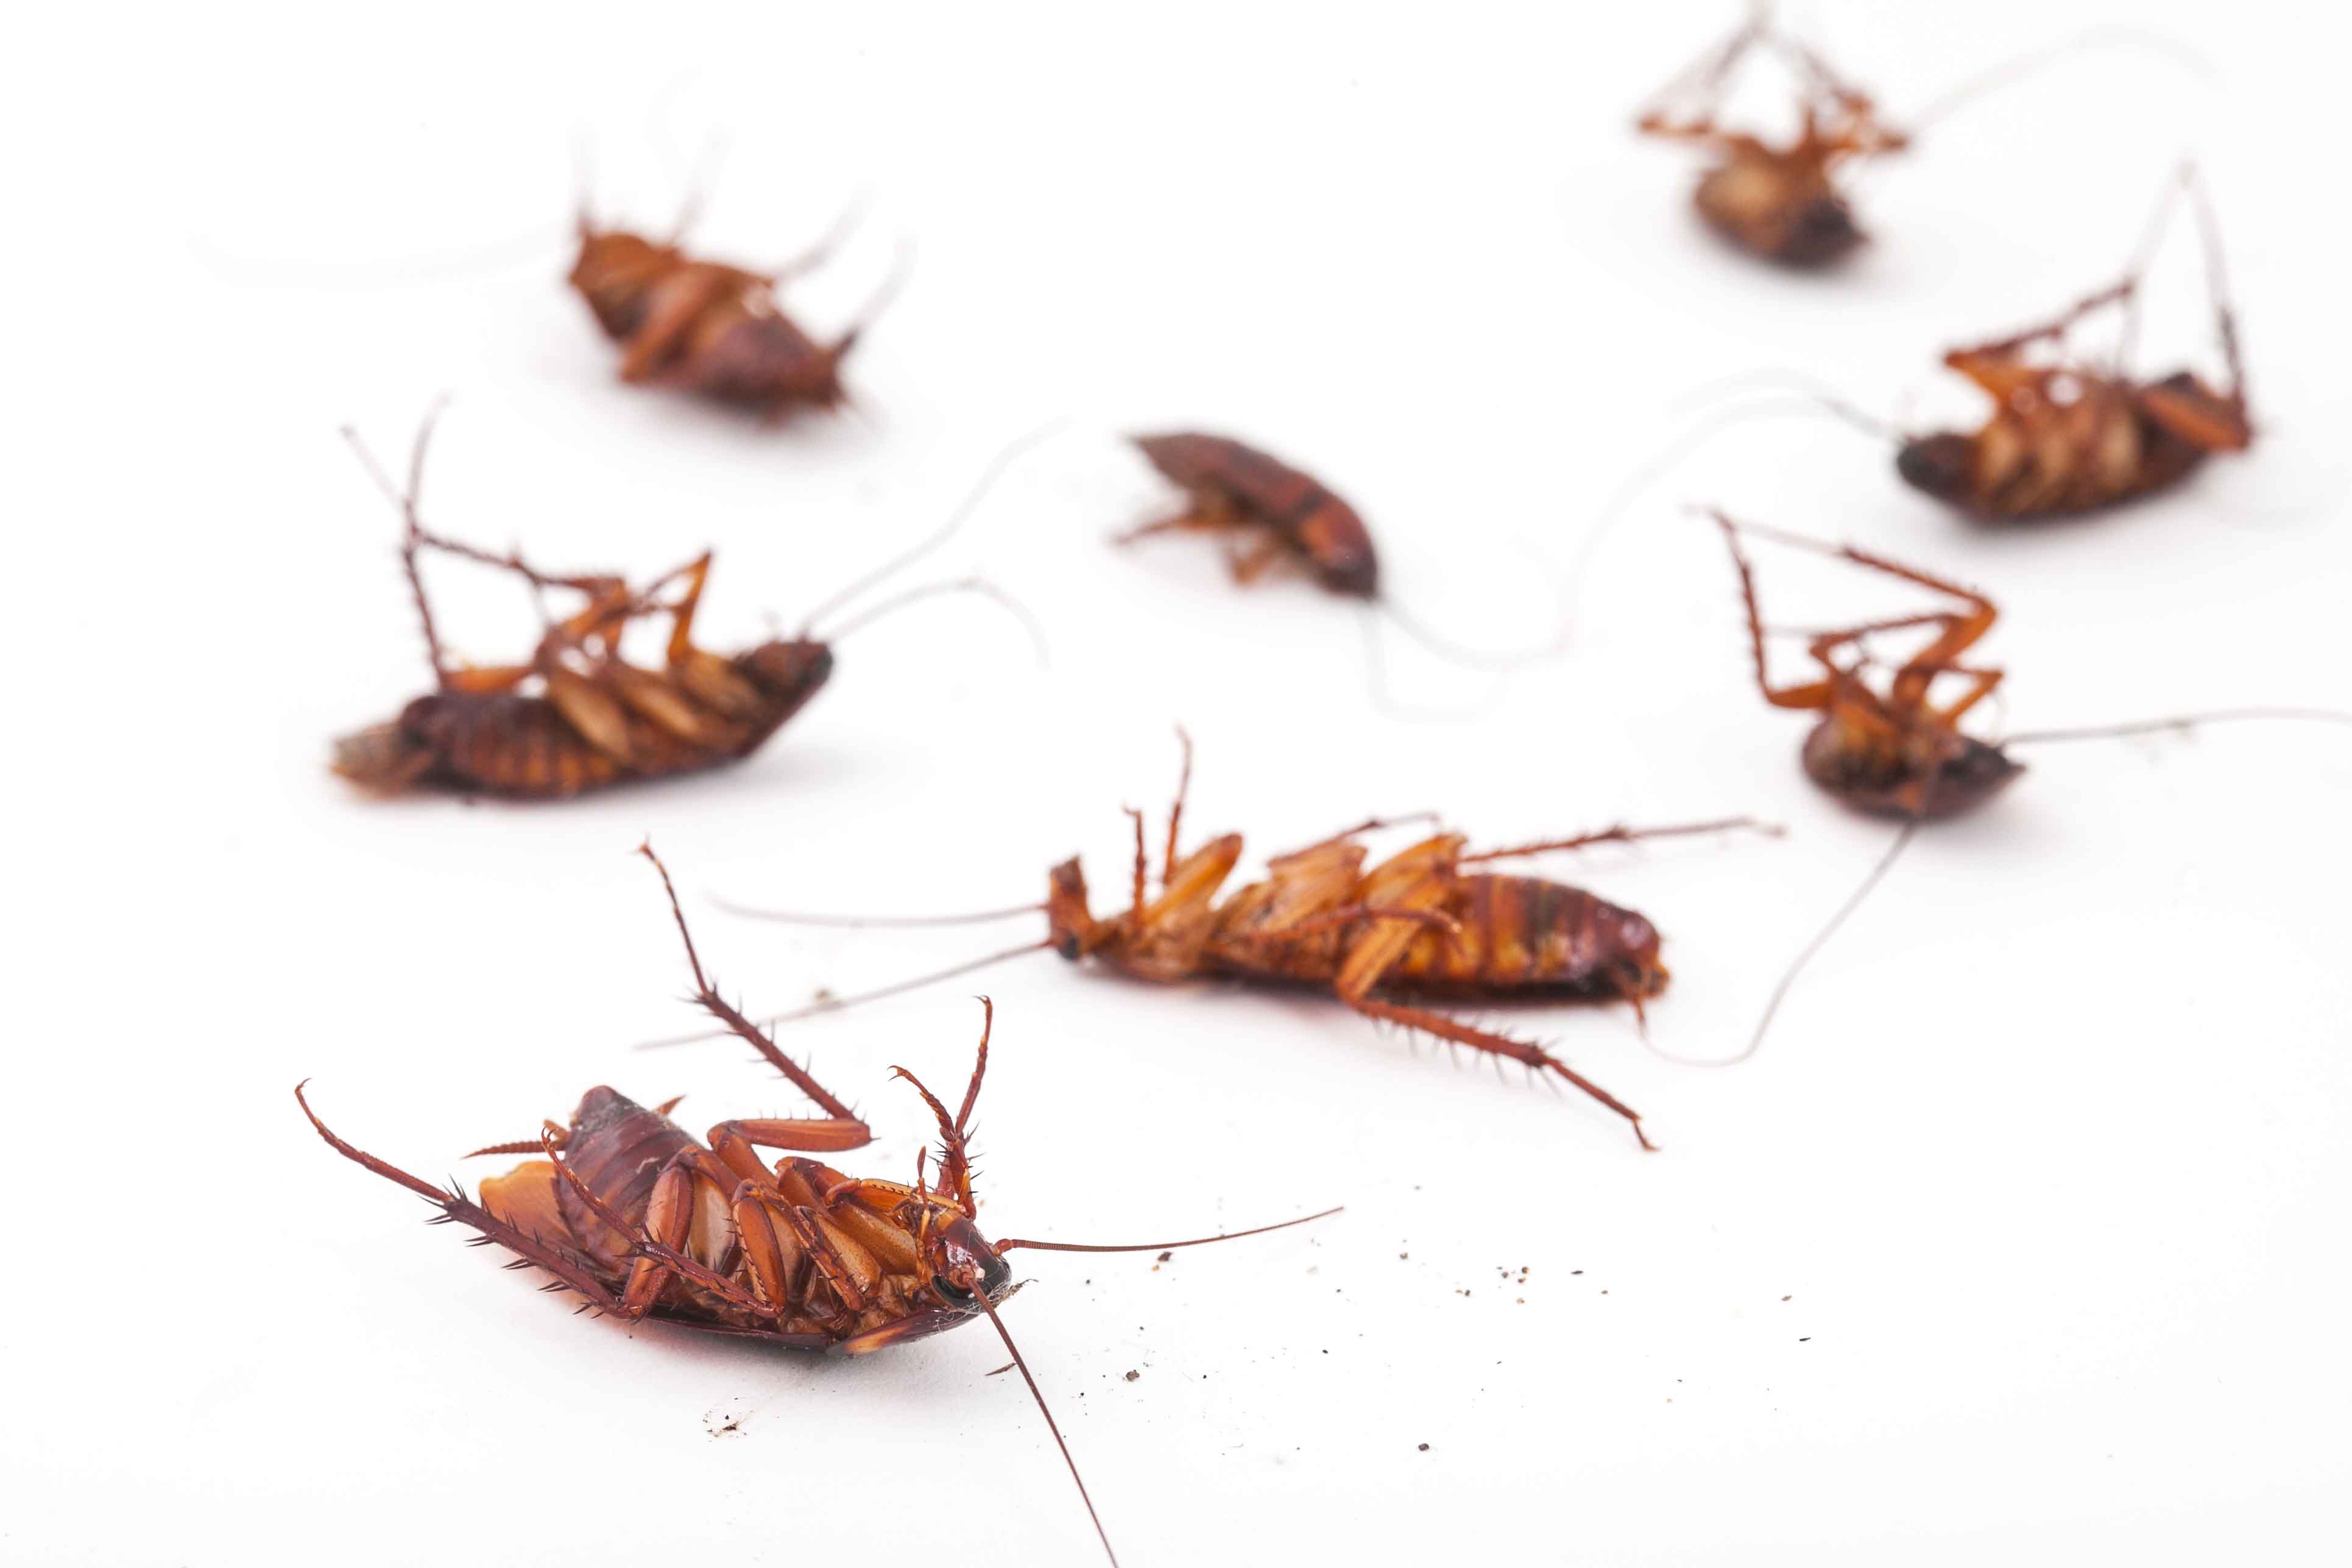 Get the Best Cockroach Killer by exploring the potent sprays, gels, and cockroach killer products offered by Ultima Search.